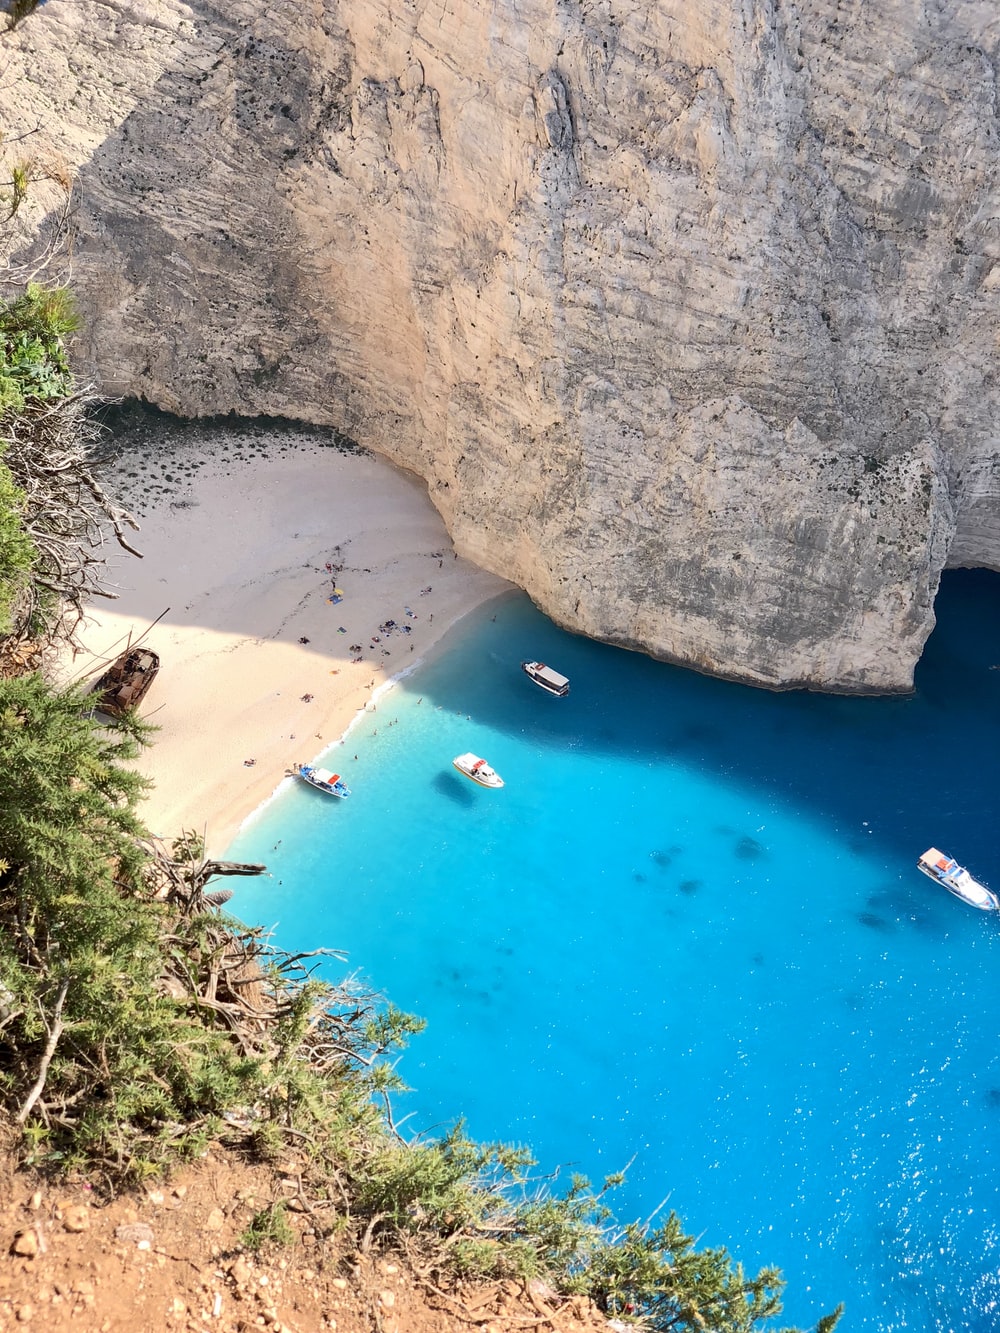 Navagio Beach Picture. Download Free Image